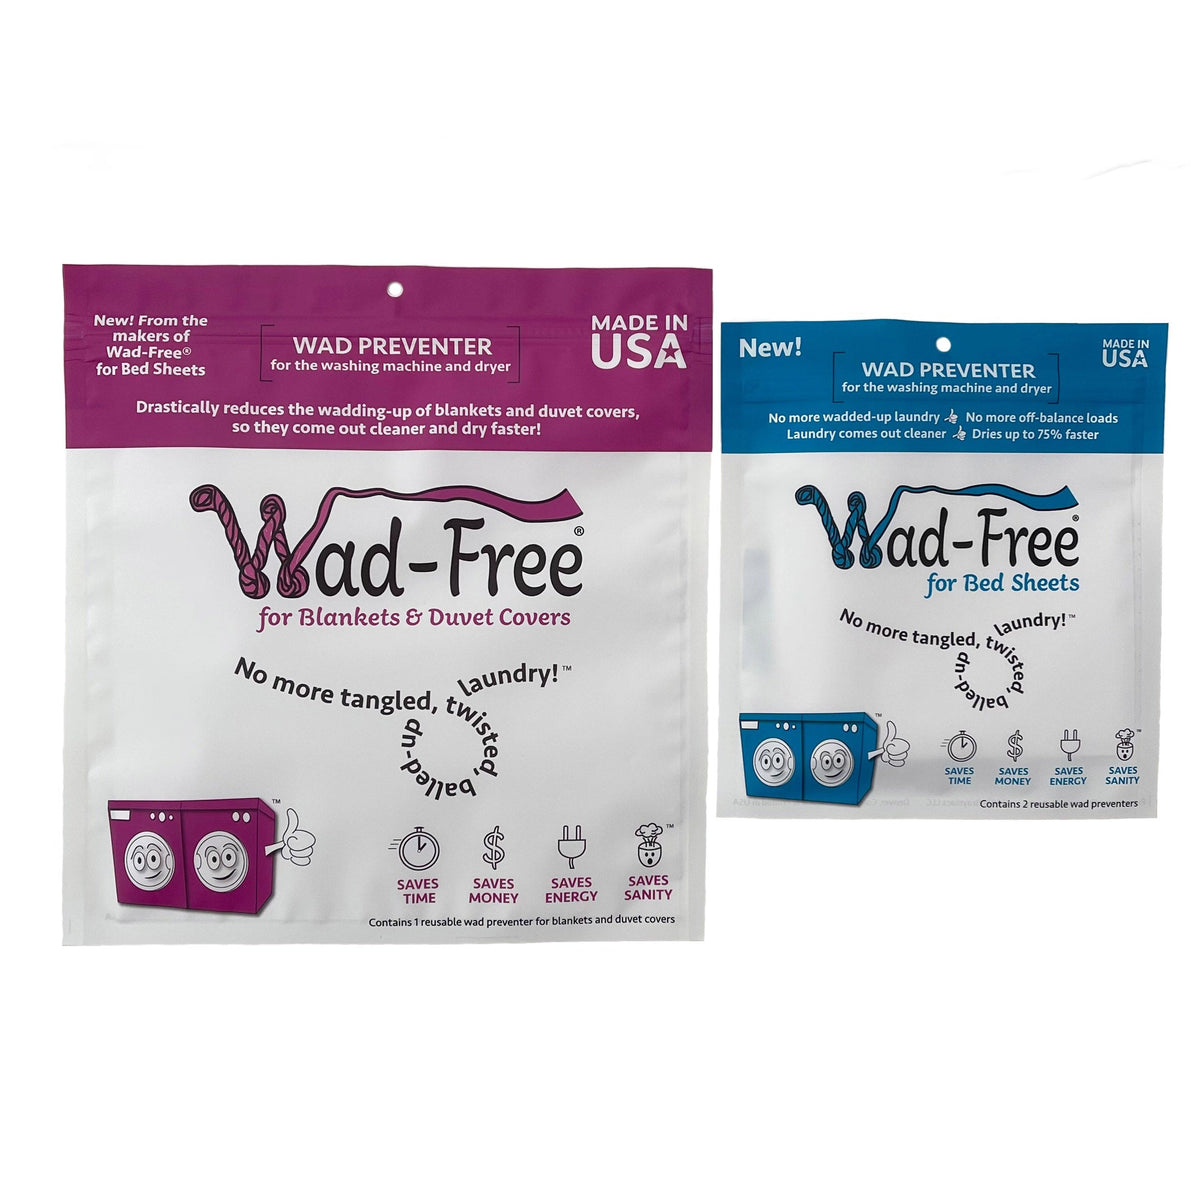 DOES IT WORK: Wad-free tests on your sheets 